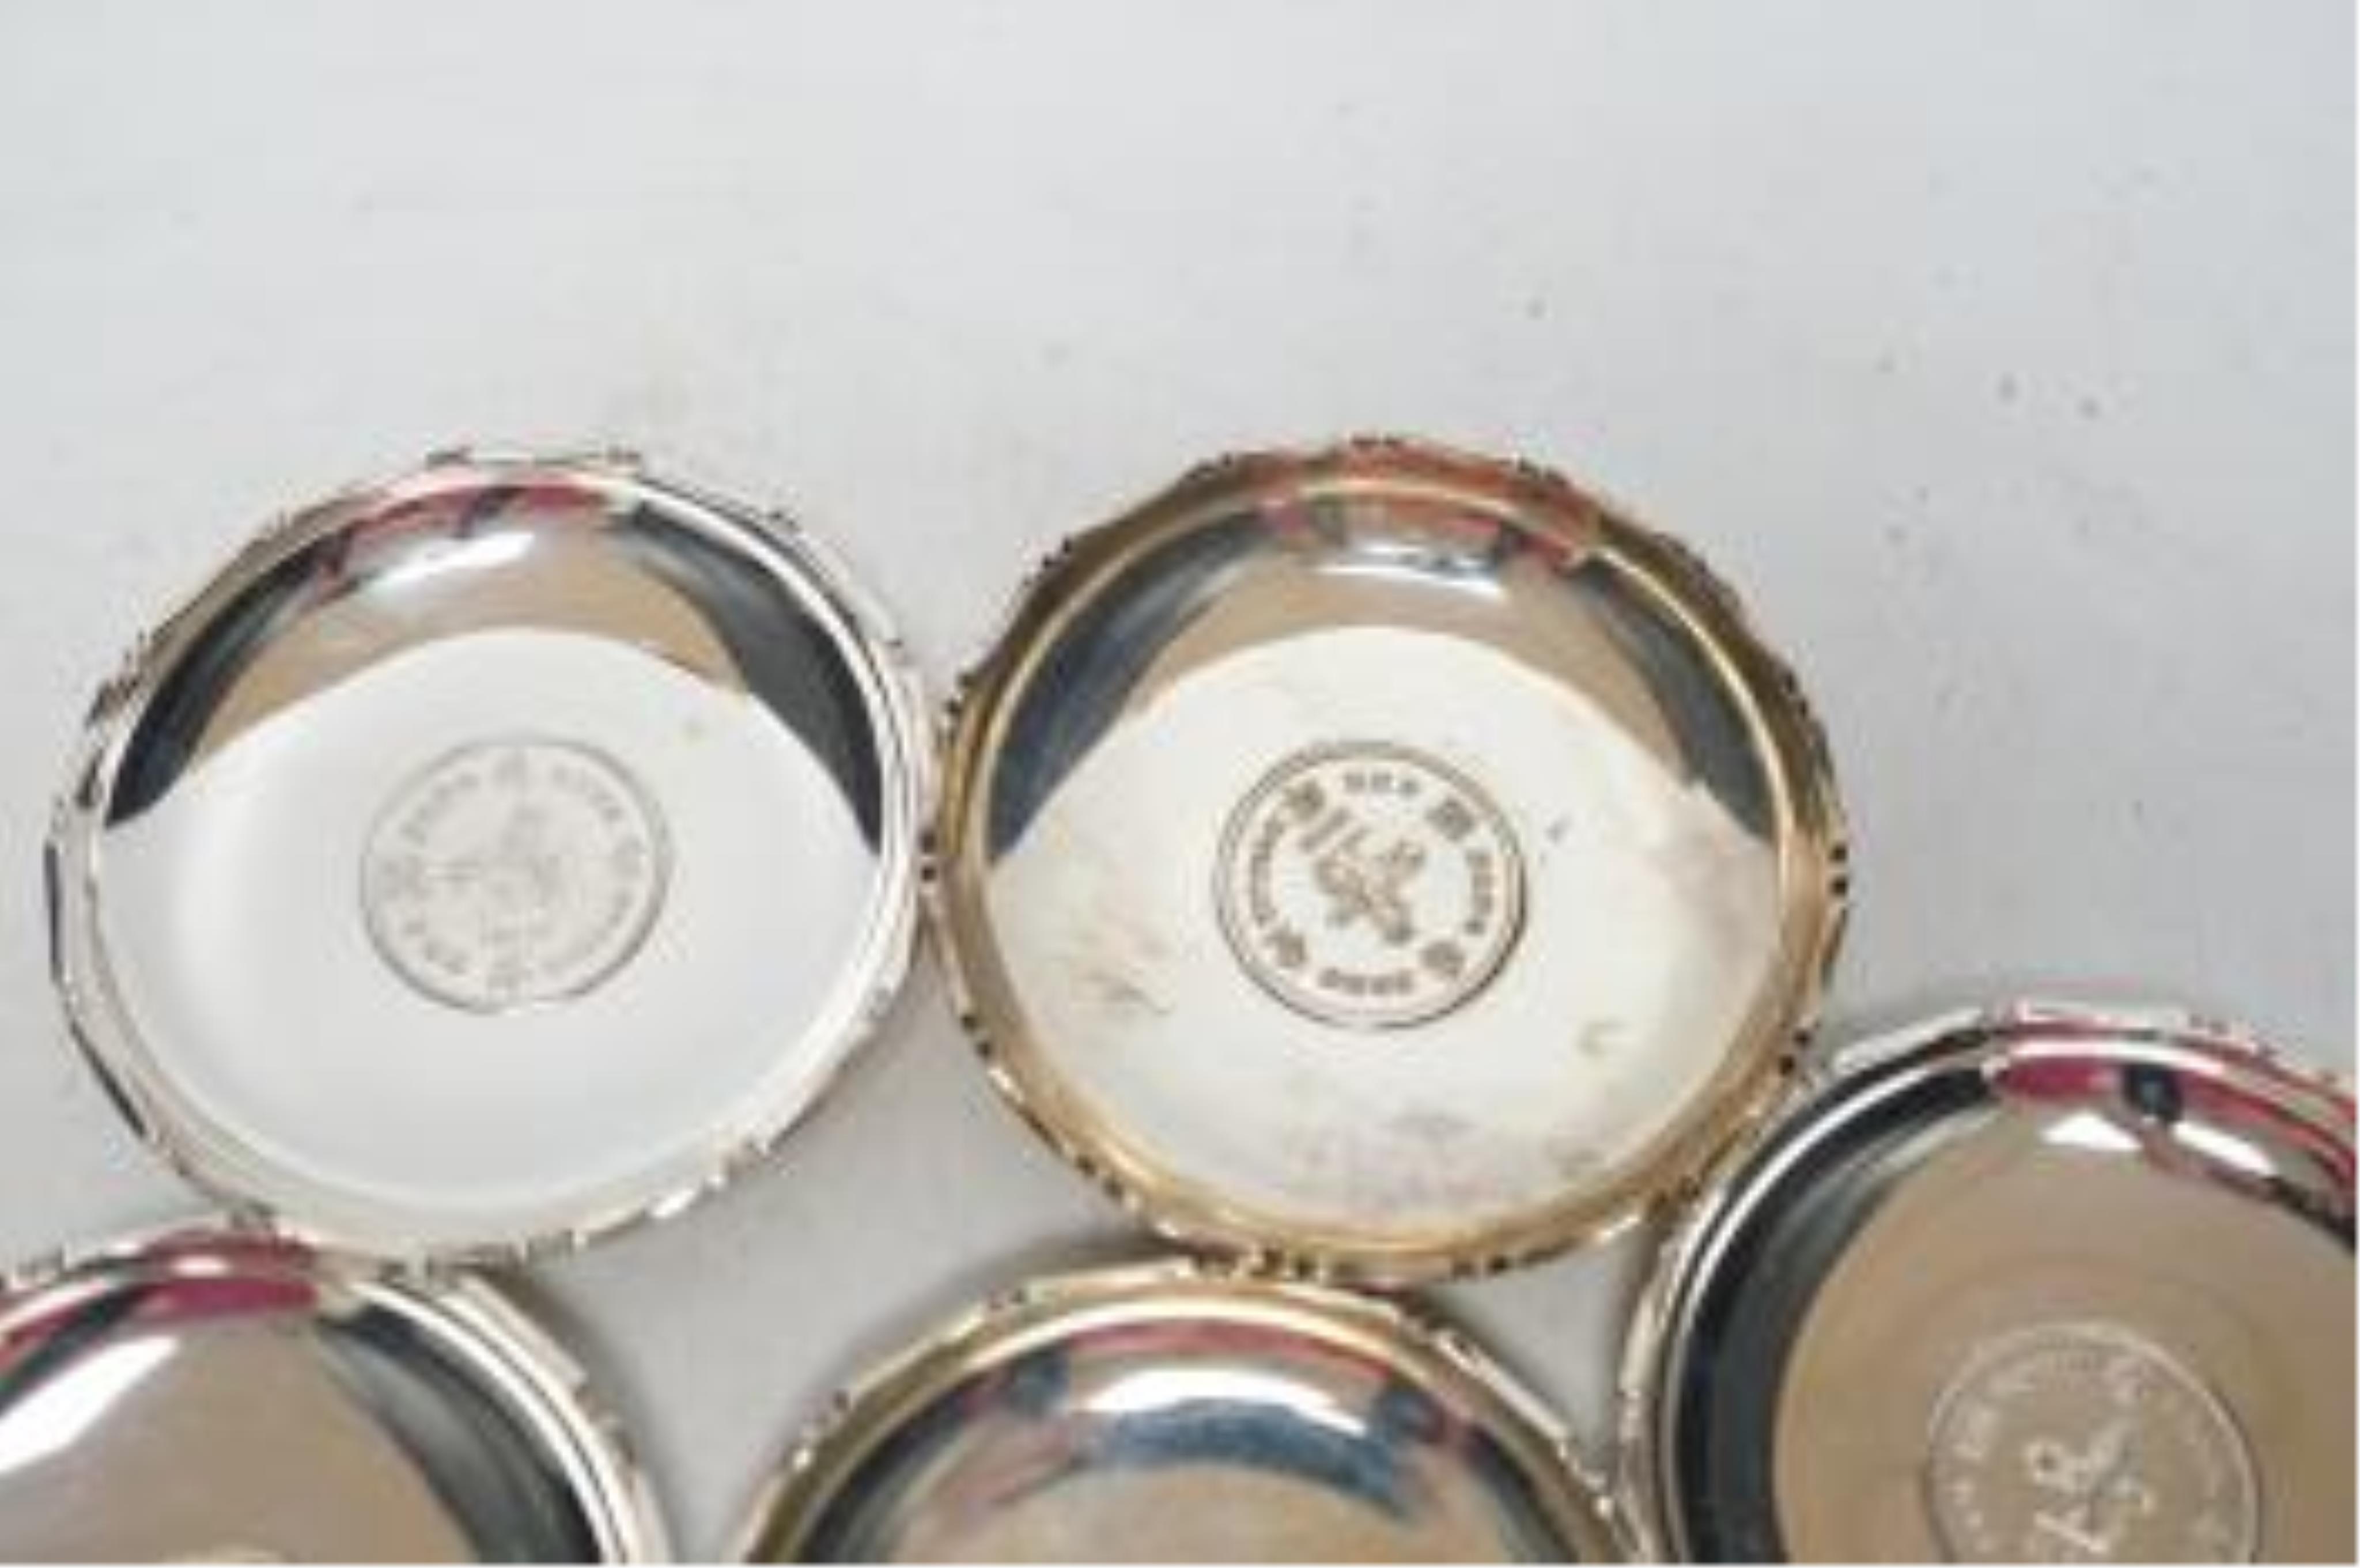 A set of seven Hong Kong sterling small dishes with inset coin, signed 'Sammy', diameter 86mm, gross weight 10.2oz. Good condition.